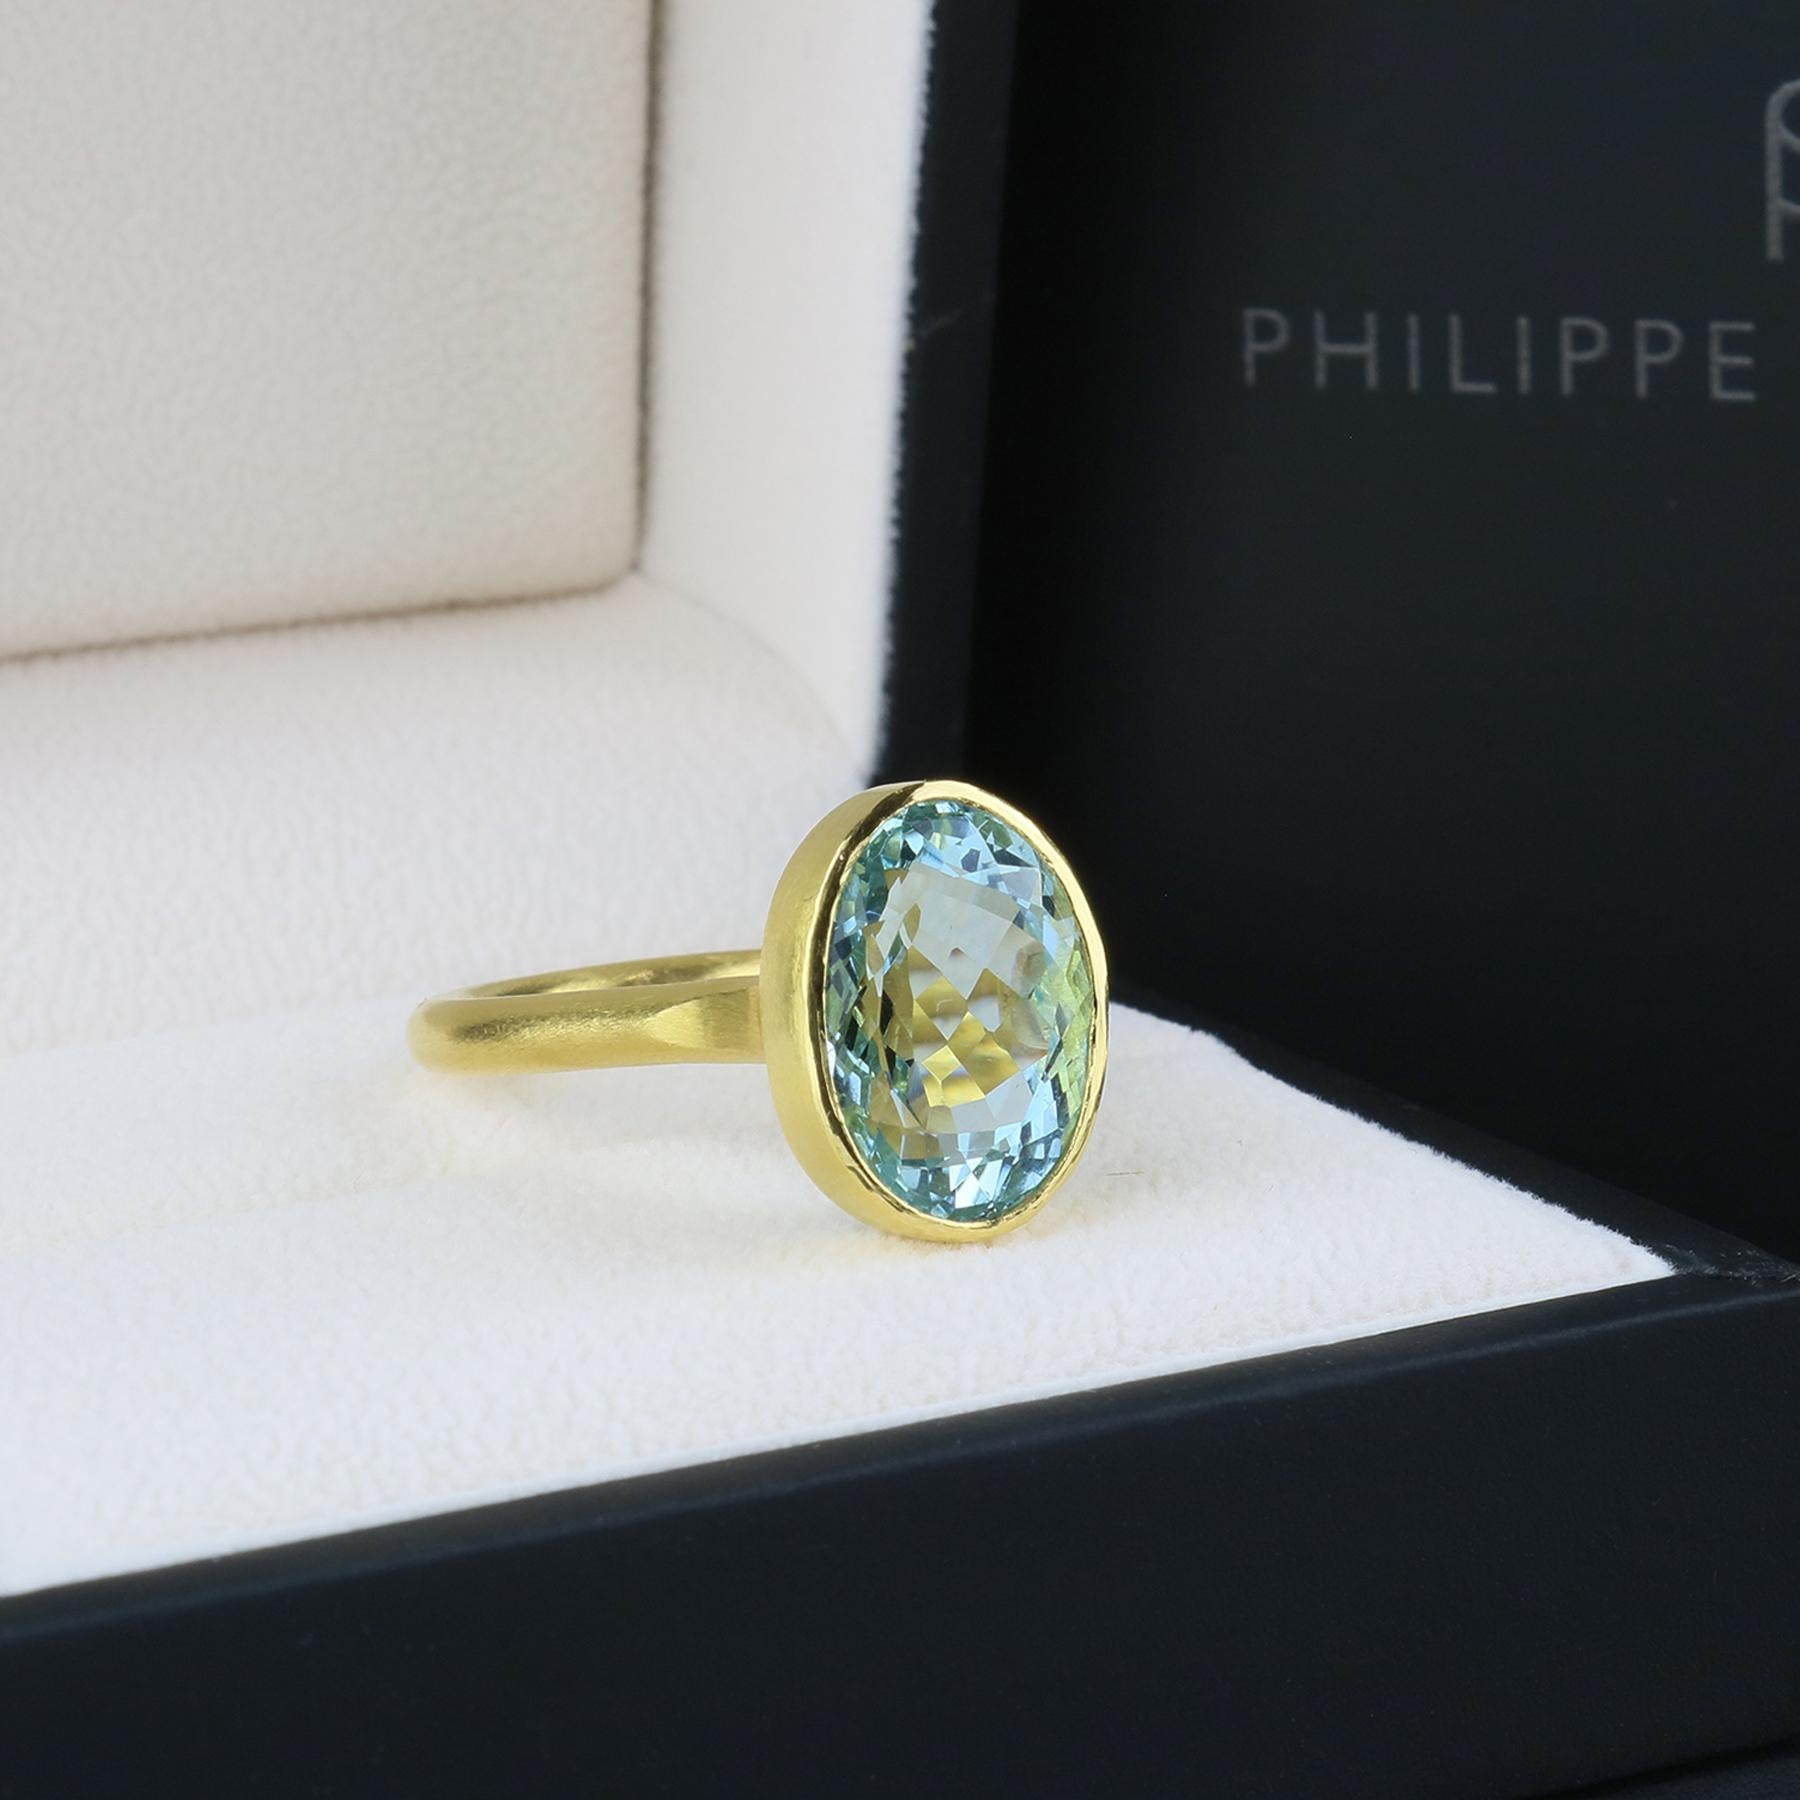 PHILIPPE SPENCER - Solid 20K Gold Completely Hand -Forged One-Of-A-Kind Absurdly High Statement Ring with 12.65 Ct. Oval Aquamarine set in backless 22K Gold Setting. Heavy Matte Brushed Finish. The size is 7 3/4 to 8, and is in-stock and ready to